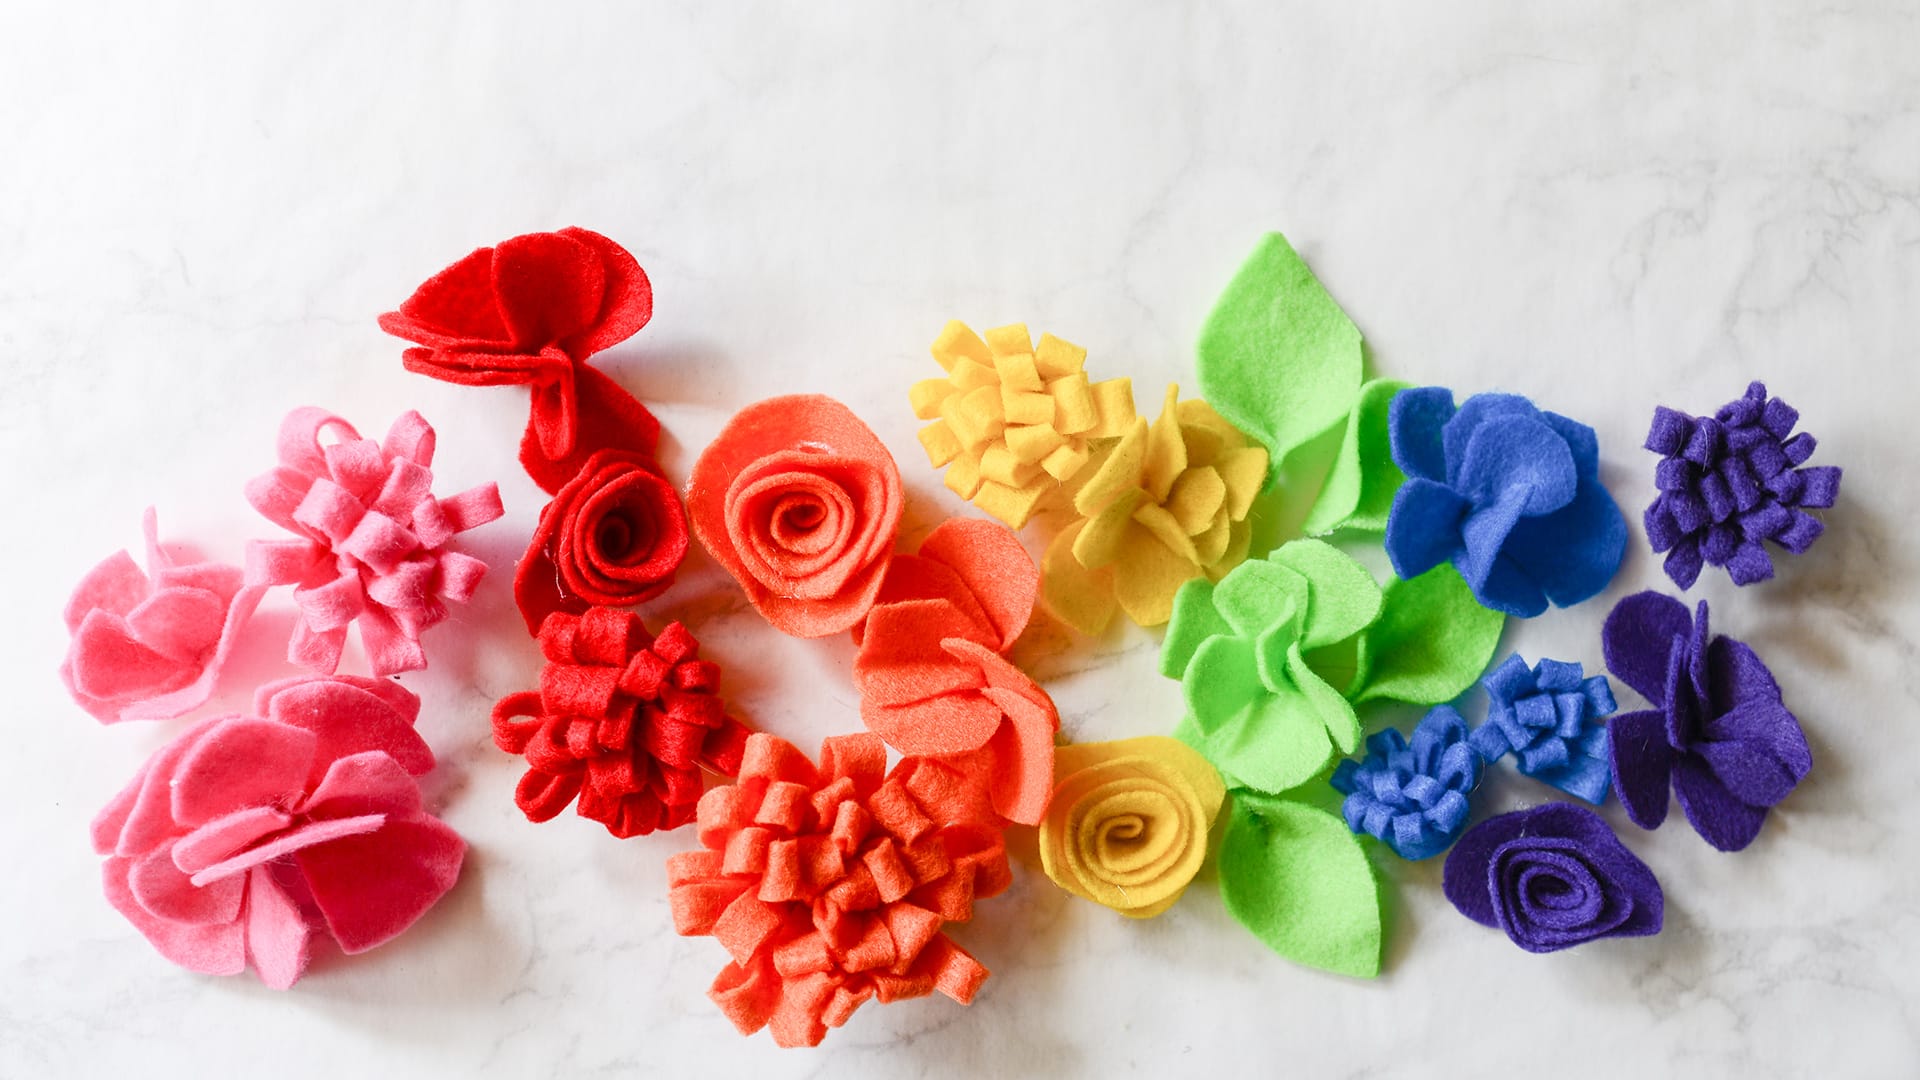 17 Projects to Make with Felt Flowers - Happily Ever After, Etc.